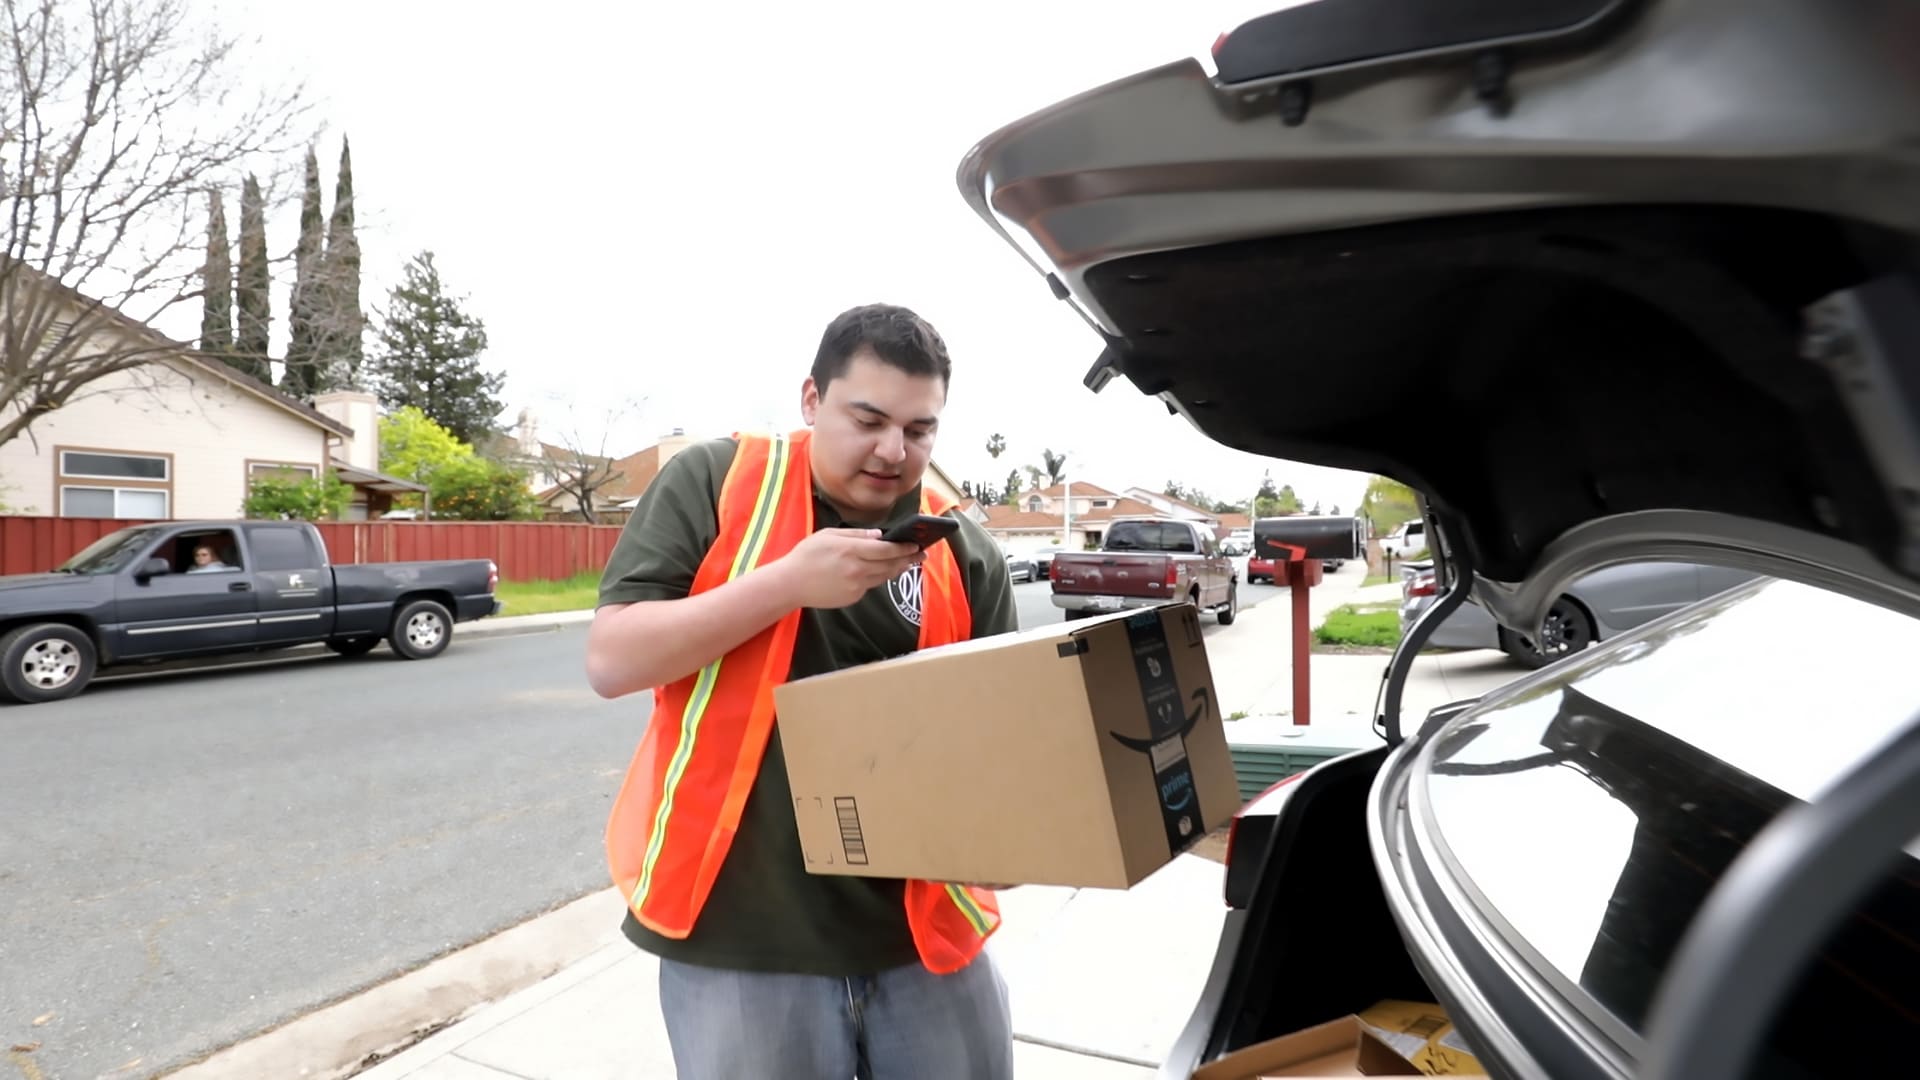 Amazon rewards program makes it easier for drivers to get more work